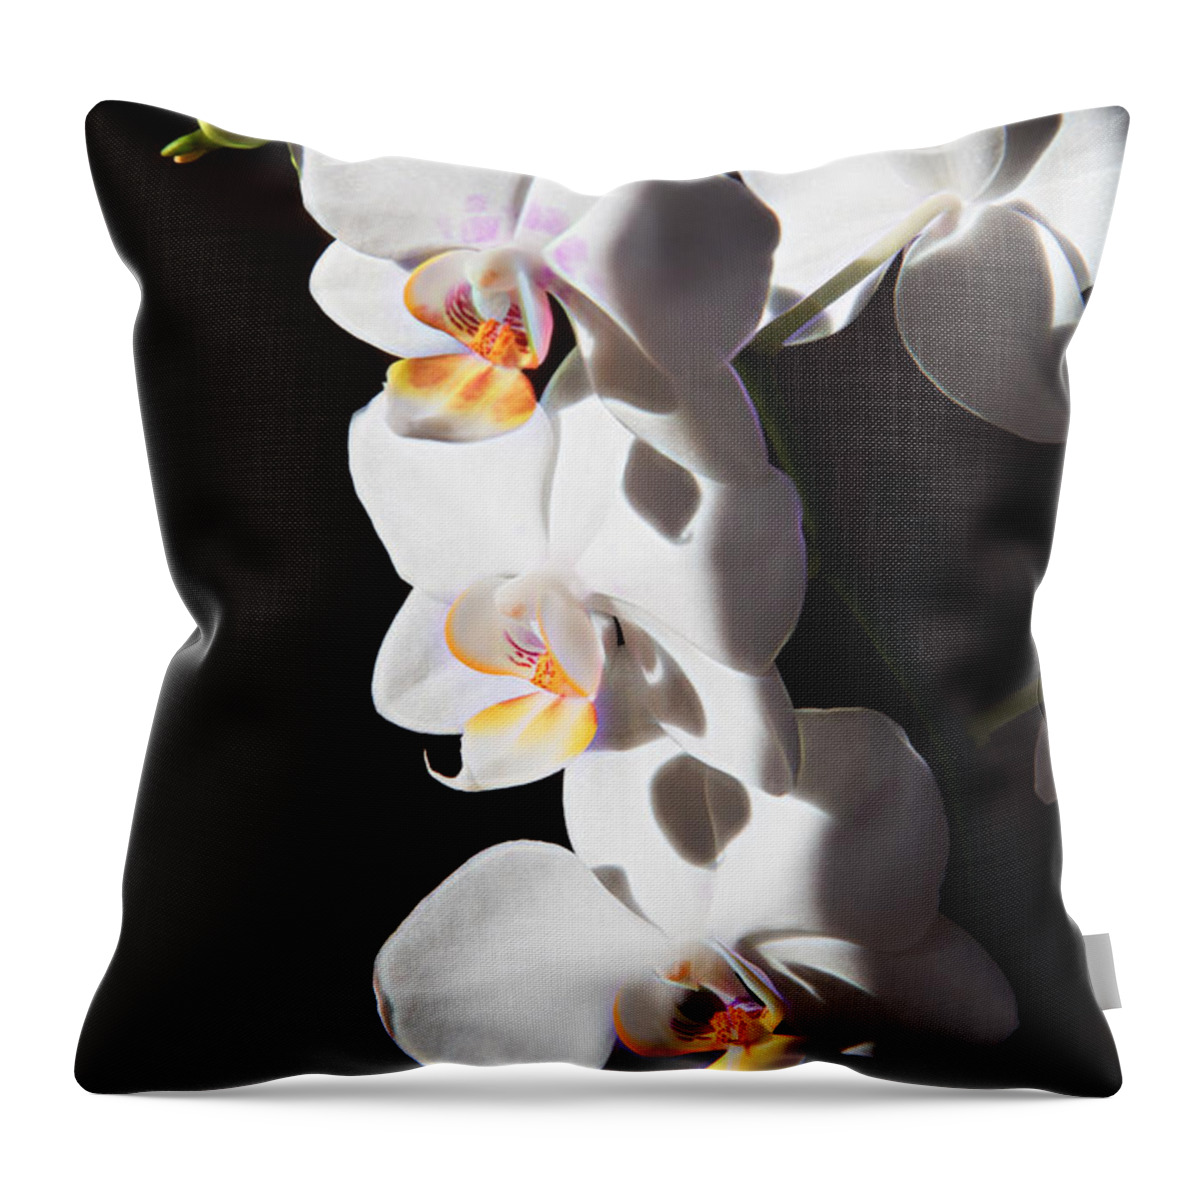 Orchids Throw Pillow featuring the photograph Orchid Quartet by Natalie Rotman Cote